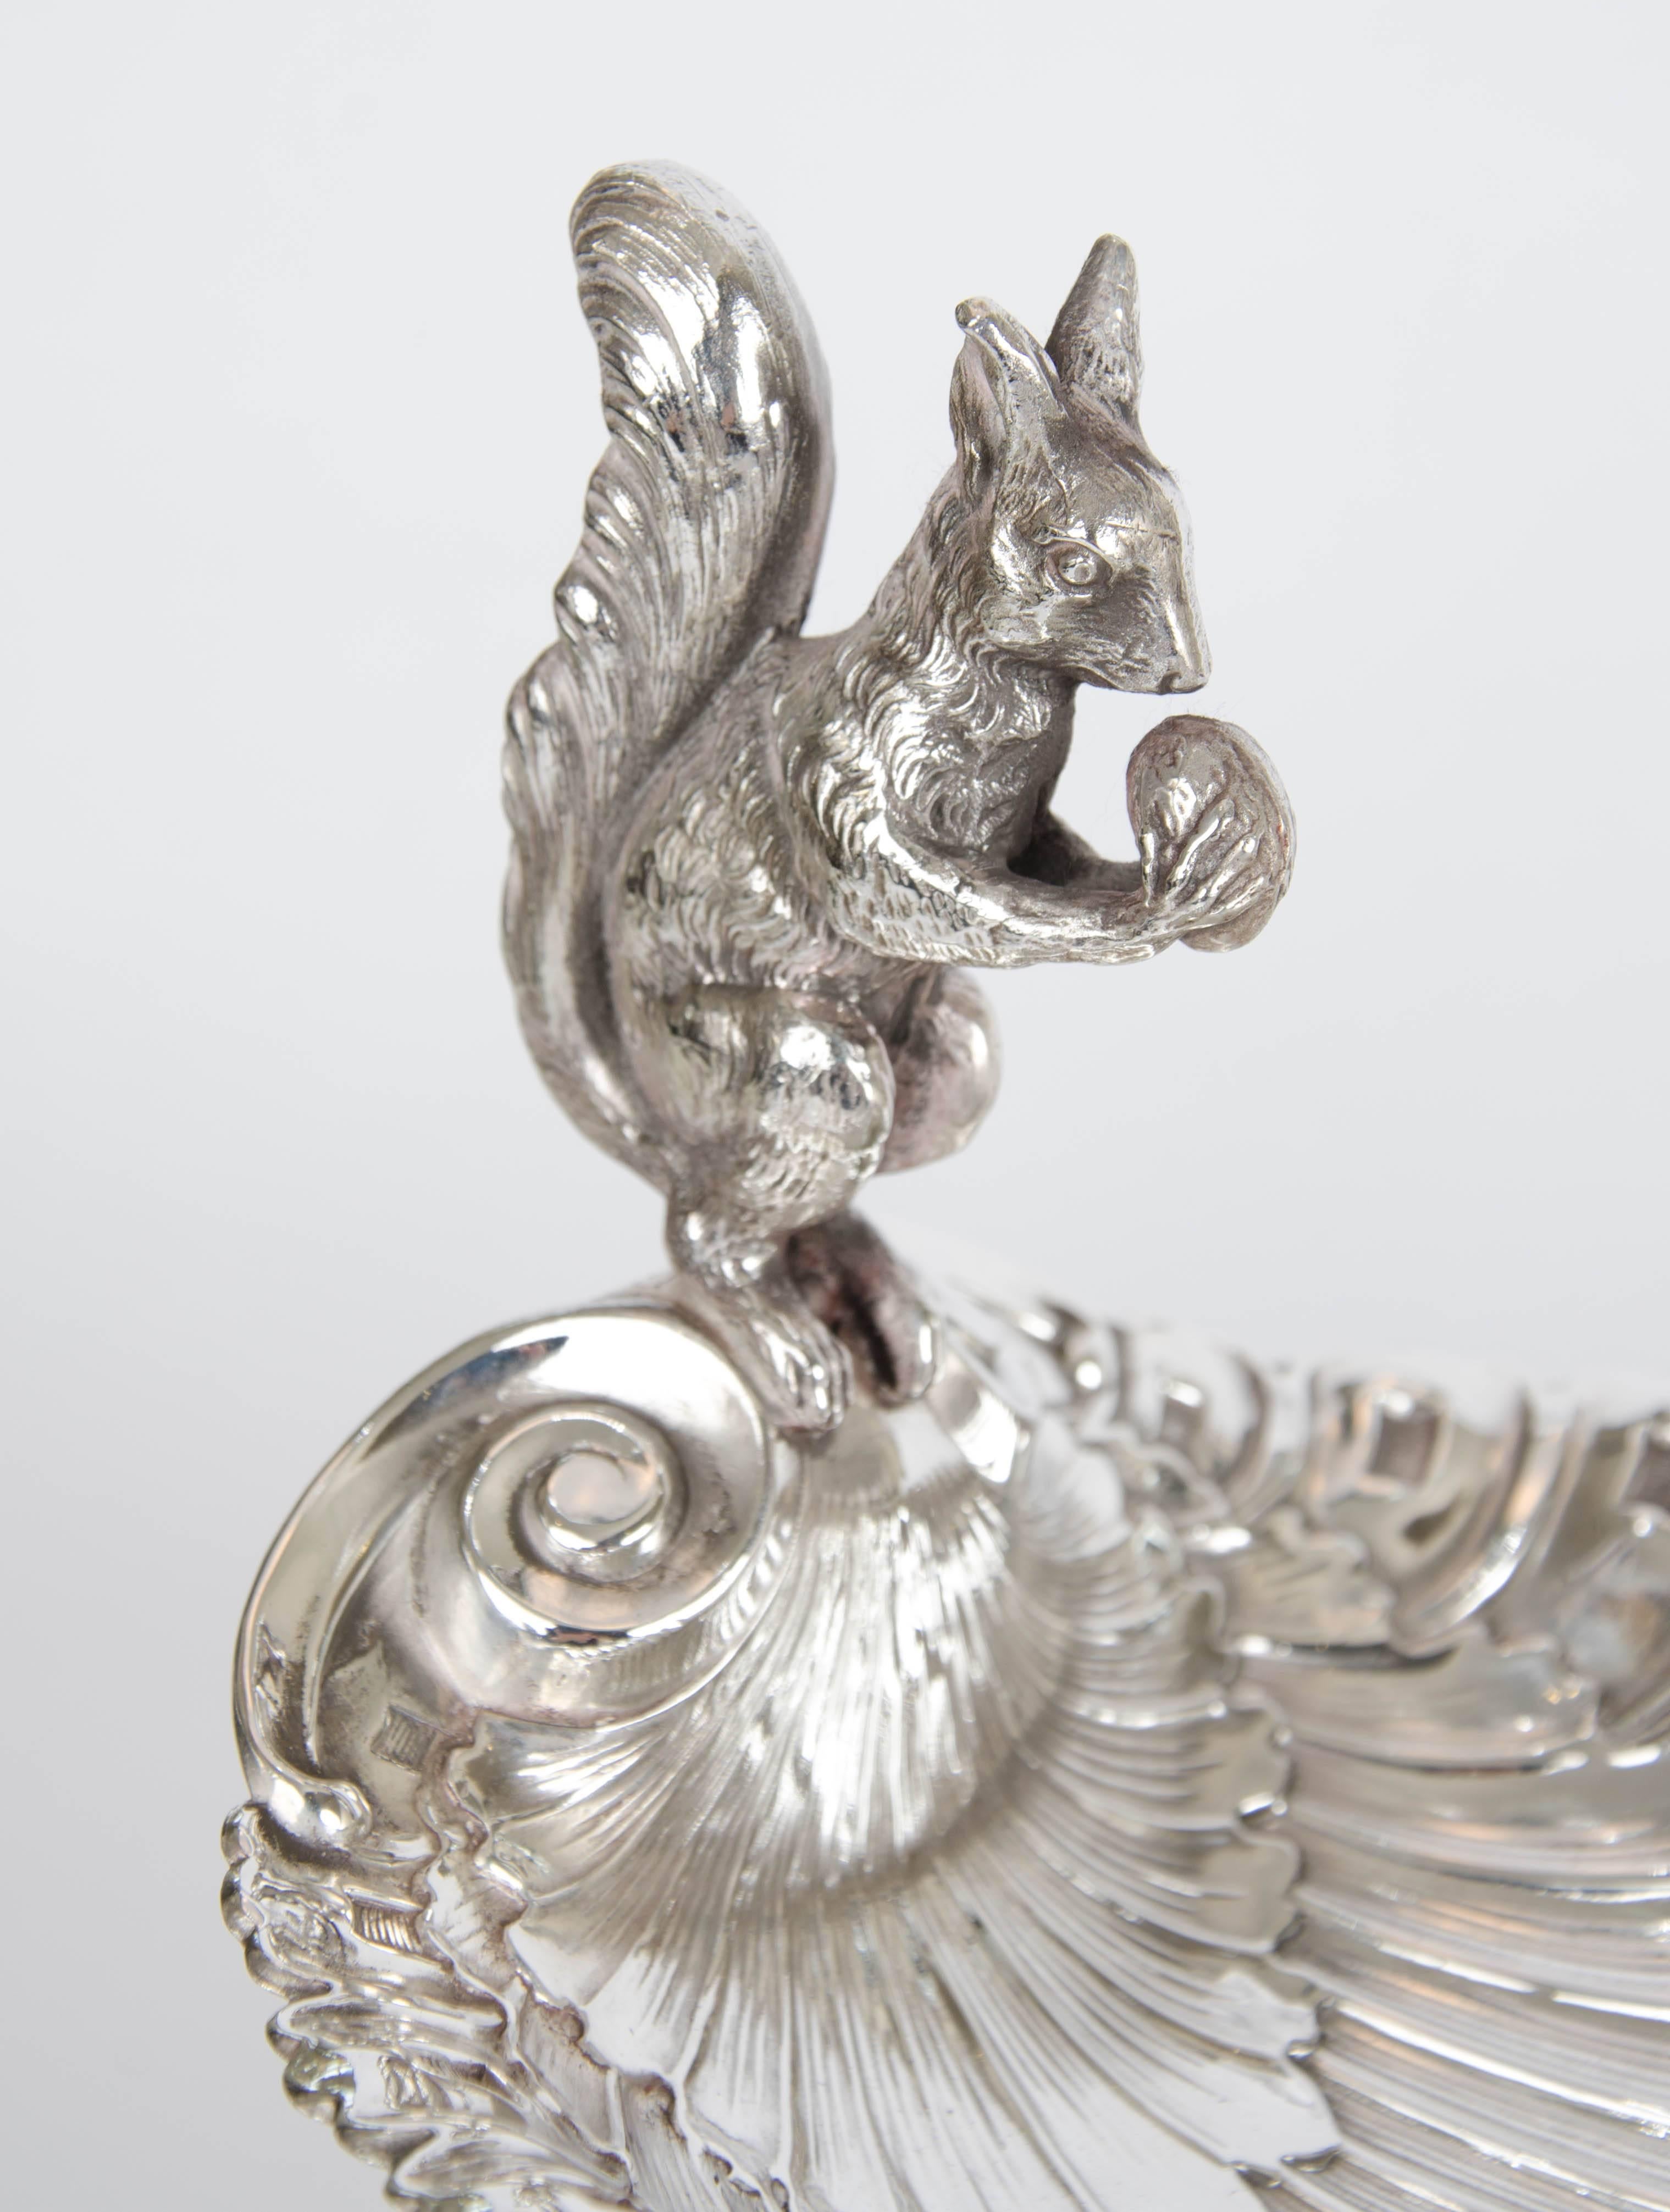 Ornate silver plate serving dish with a squirrel figurine, circa 1890. A fun way to serve assorted nuts or tidbits to your guests at a cocktail party.

Please contact us for shipping prices.